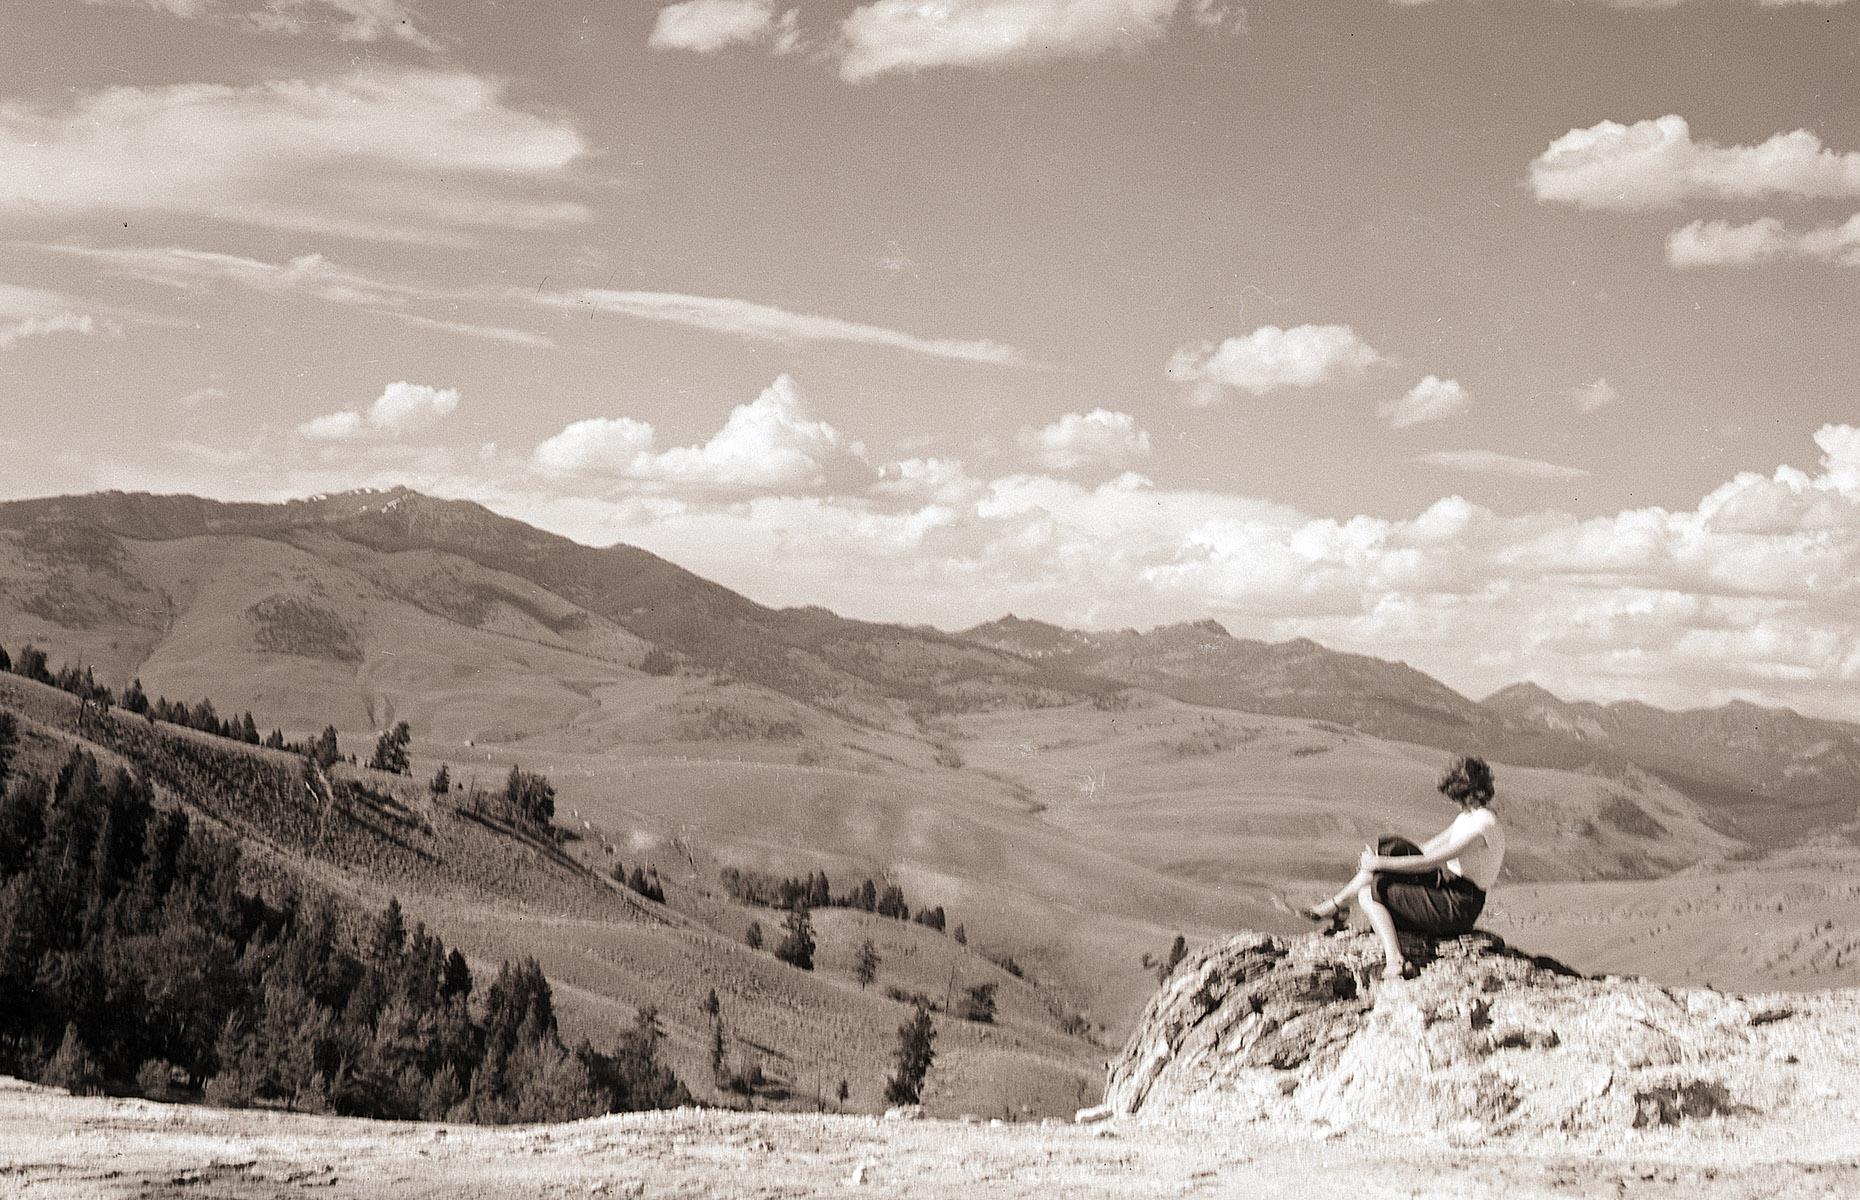 Visitation soared through the 1950s and the National Park Service launched Mission 66. The project aimed to rebuild a park system devastated by war – a whole decade was spent sprucing up facilities and expanding services available to visitors across all national parks, including Yellowstone. A lone woman admires the rugged landscape in this photograph from 1955, when Mission 66 was launched.